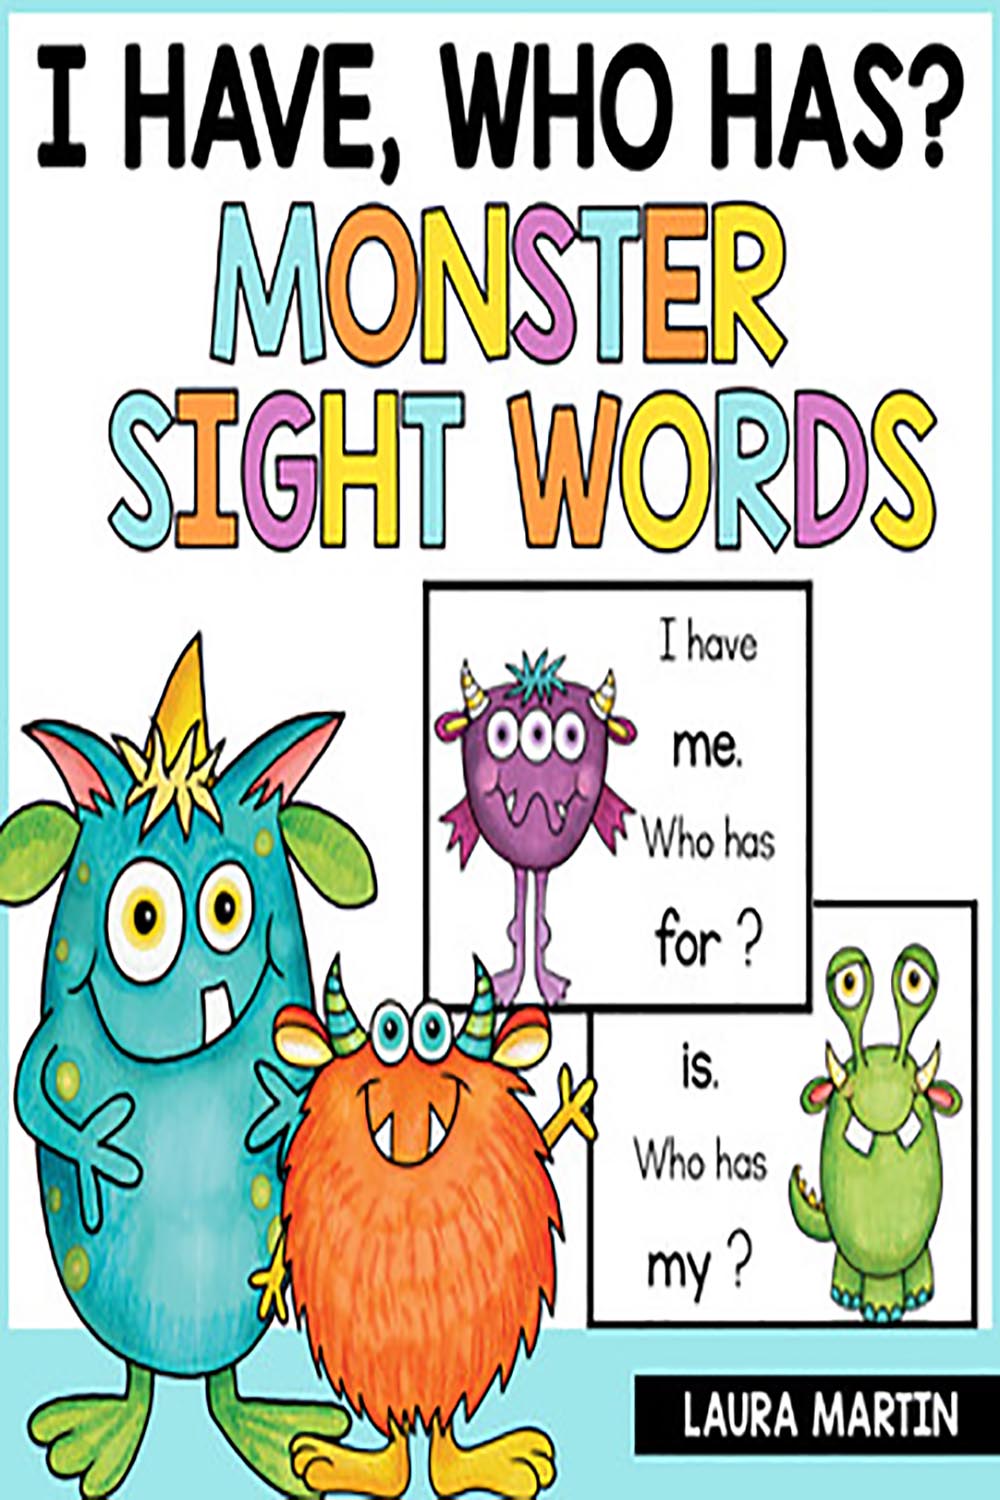 I Have Who Has - Sight Word Game - Sight Word Practice - EDITABLE pinterest preview image.